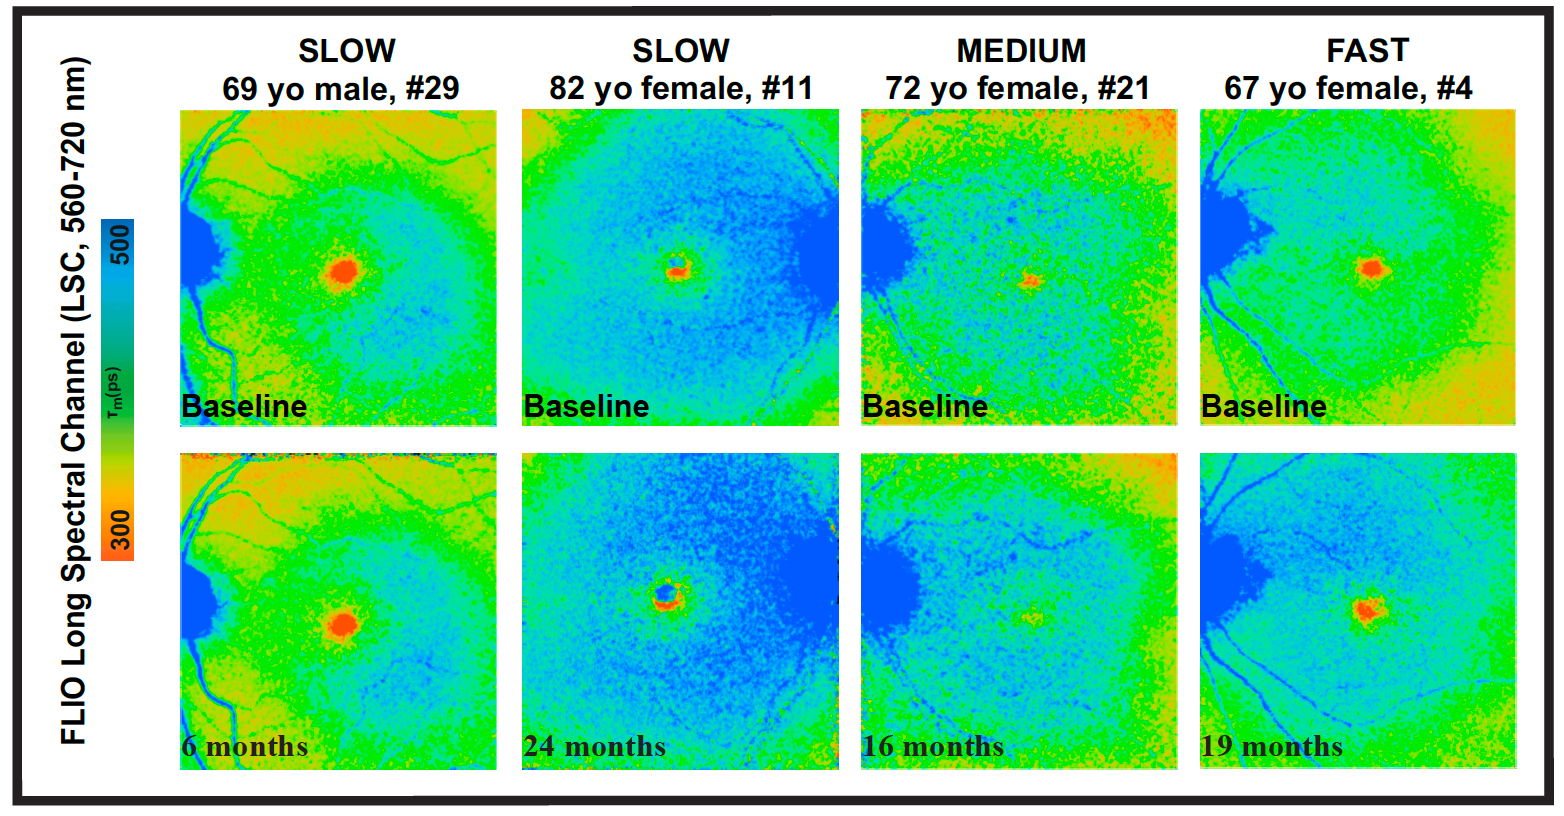 Fluorescence lifetime imaging ophthalmoscopy (FLIO) lifetimes (long spectral channel [LSC]) from 4 patients with age-related macular degeneration at baseline and follow-up. Individual patients show different progression independent of age. Progression was classified as fast, medium or slow. The follow-up time in months is indicated in the images. (Images courtesy of Jace Buxton)